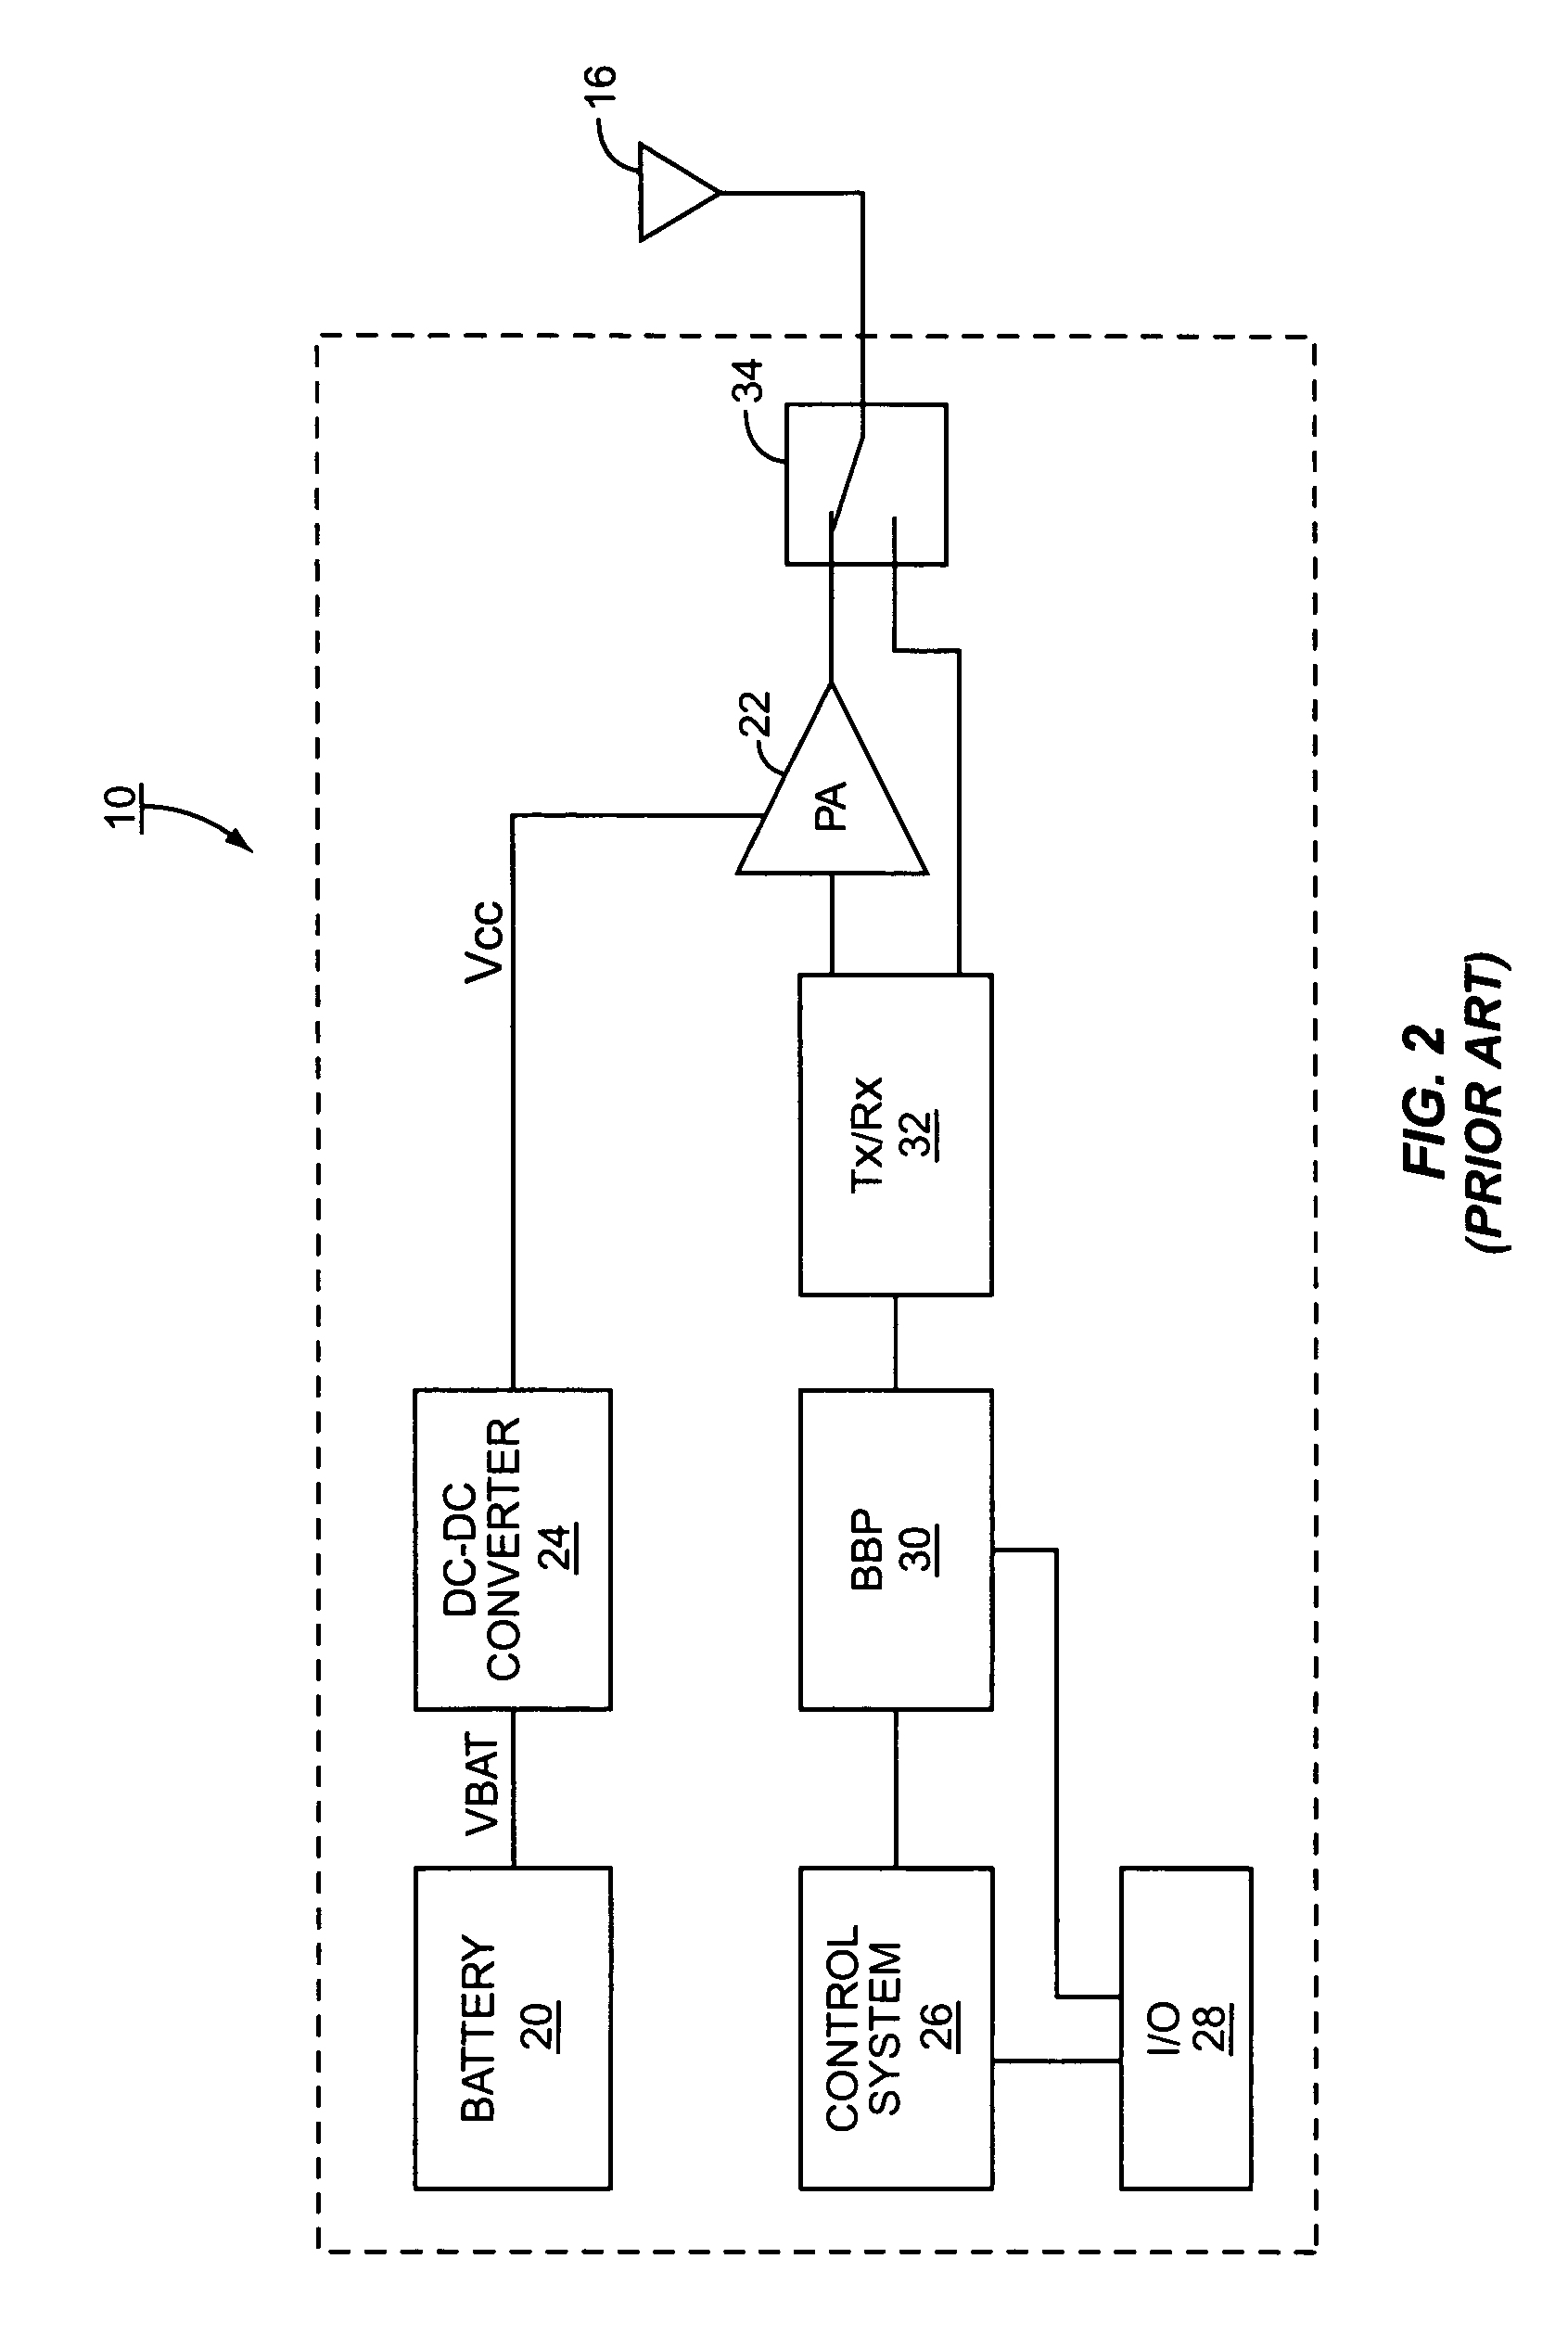 DC-DC converter with noise spreading to meet spectral mask requirements